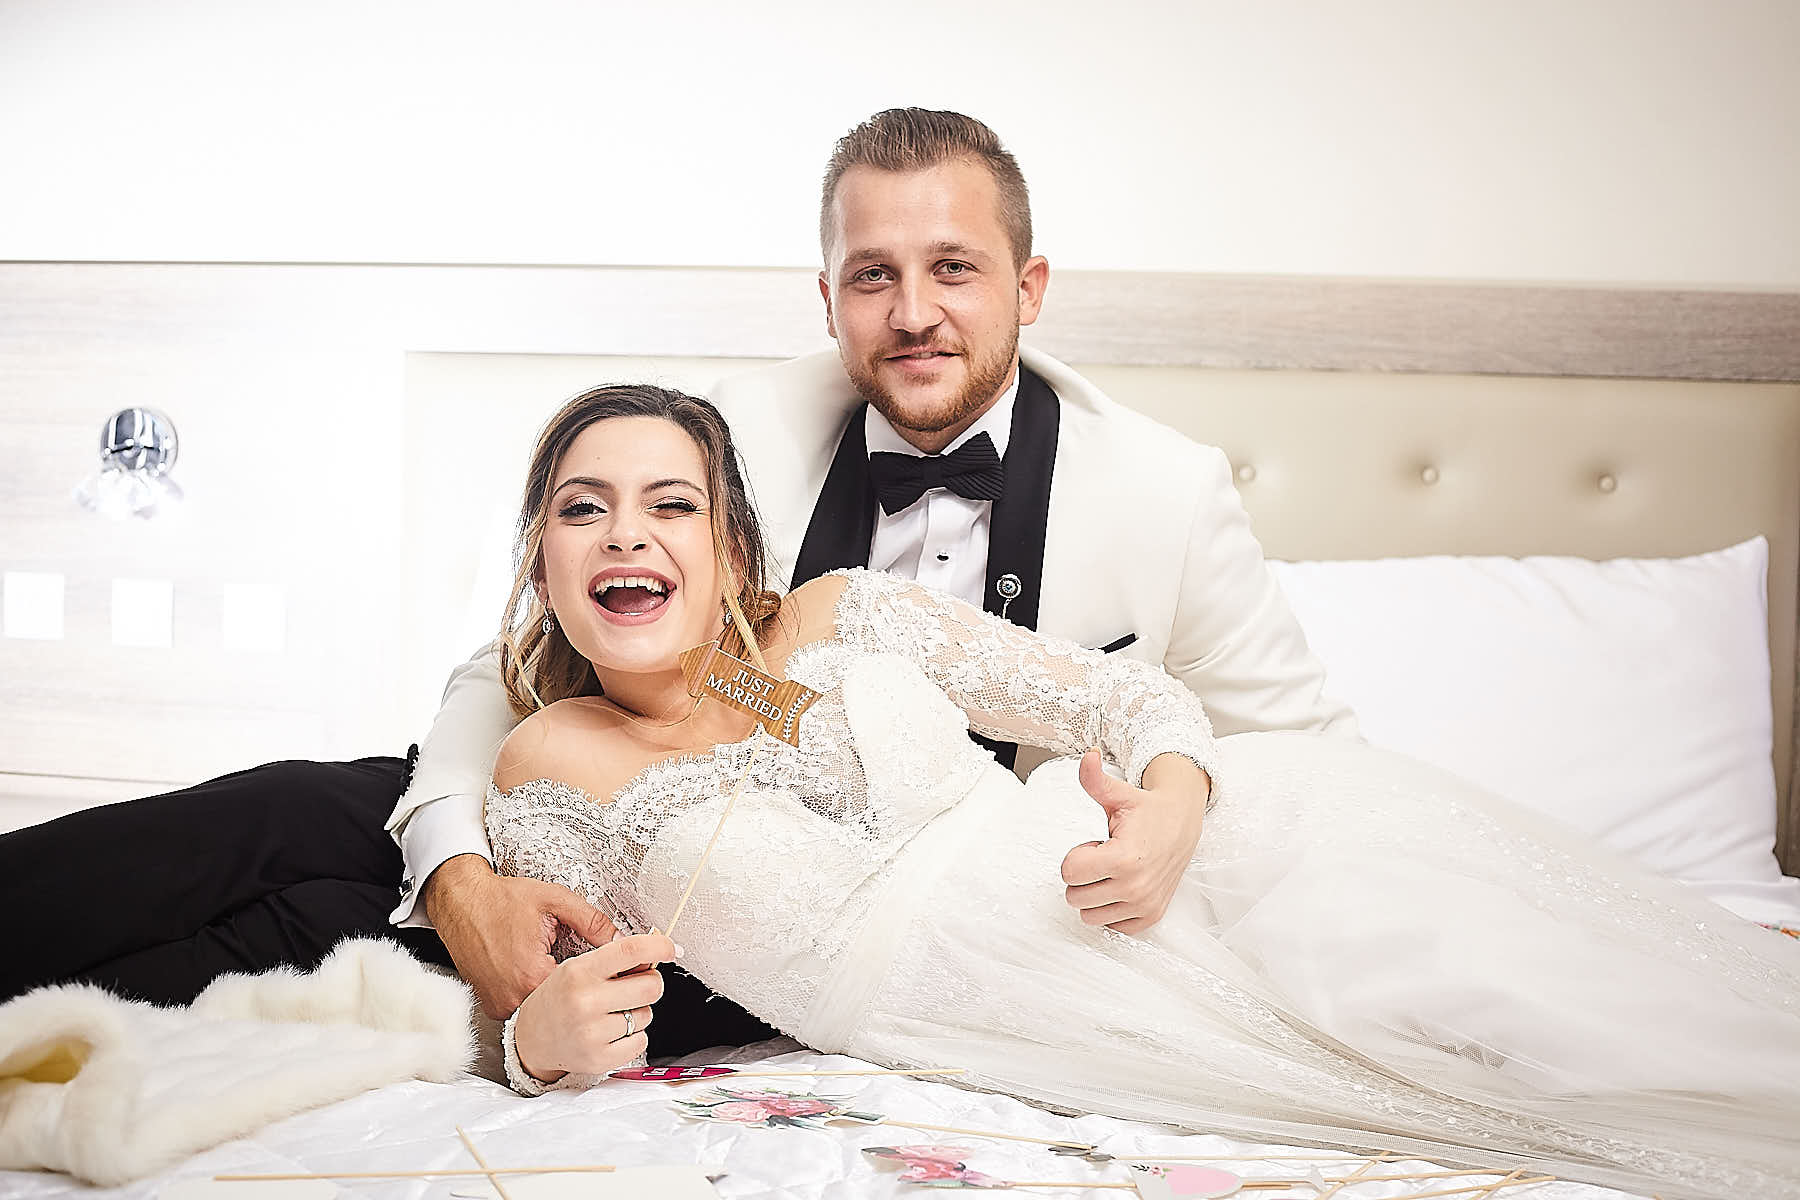 couple relaxing, bride holding a "Just Married" sign and giving a thumbs up and groom smiling at the camera